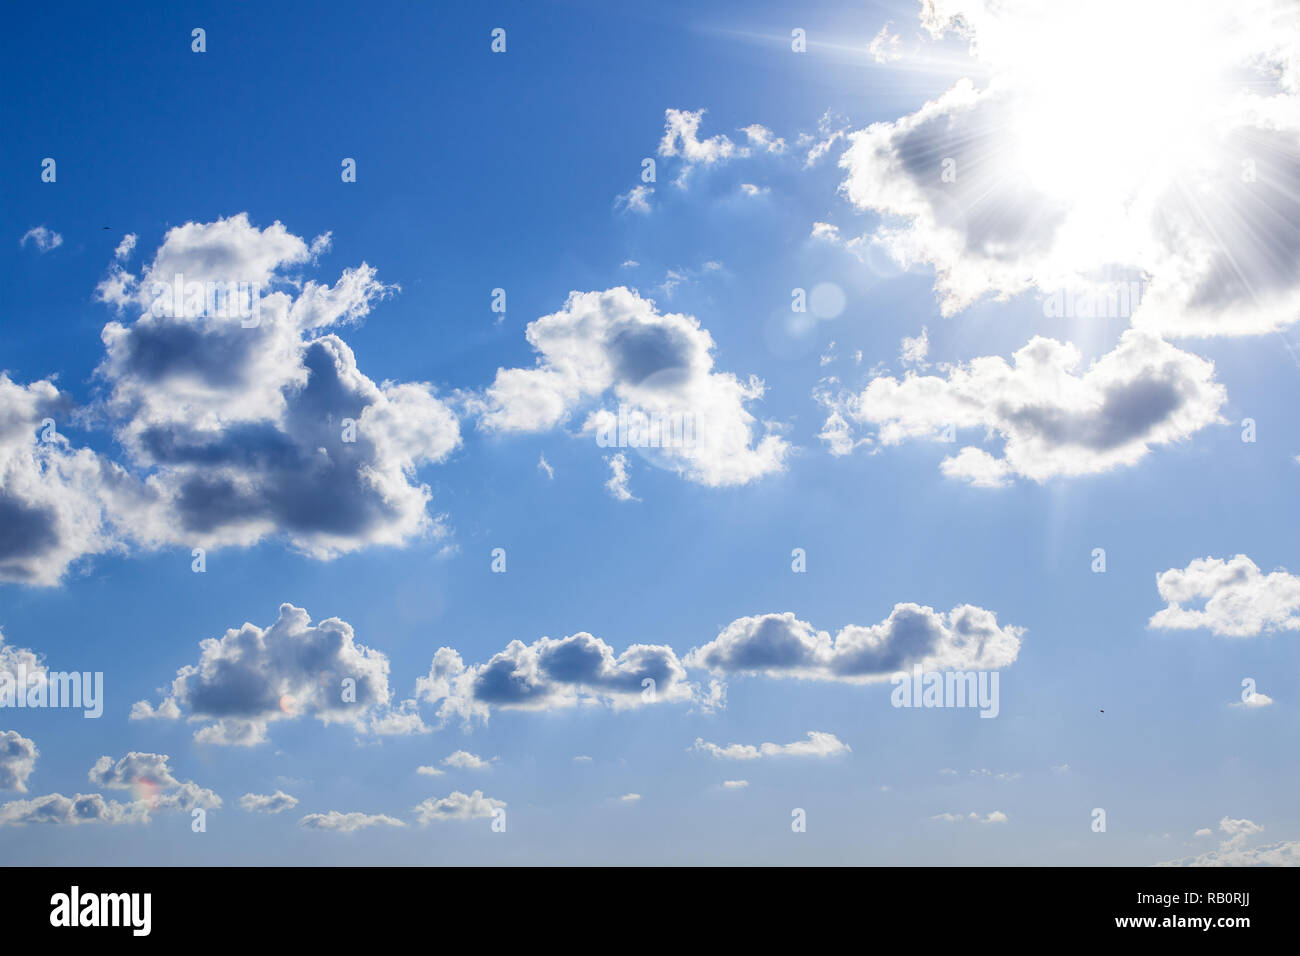 blue sky with sunbeams and clouds. Stock Photo